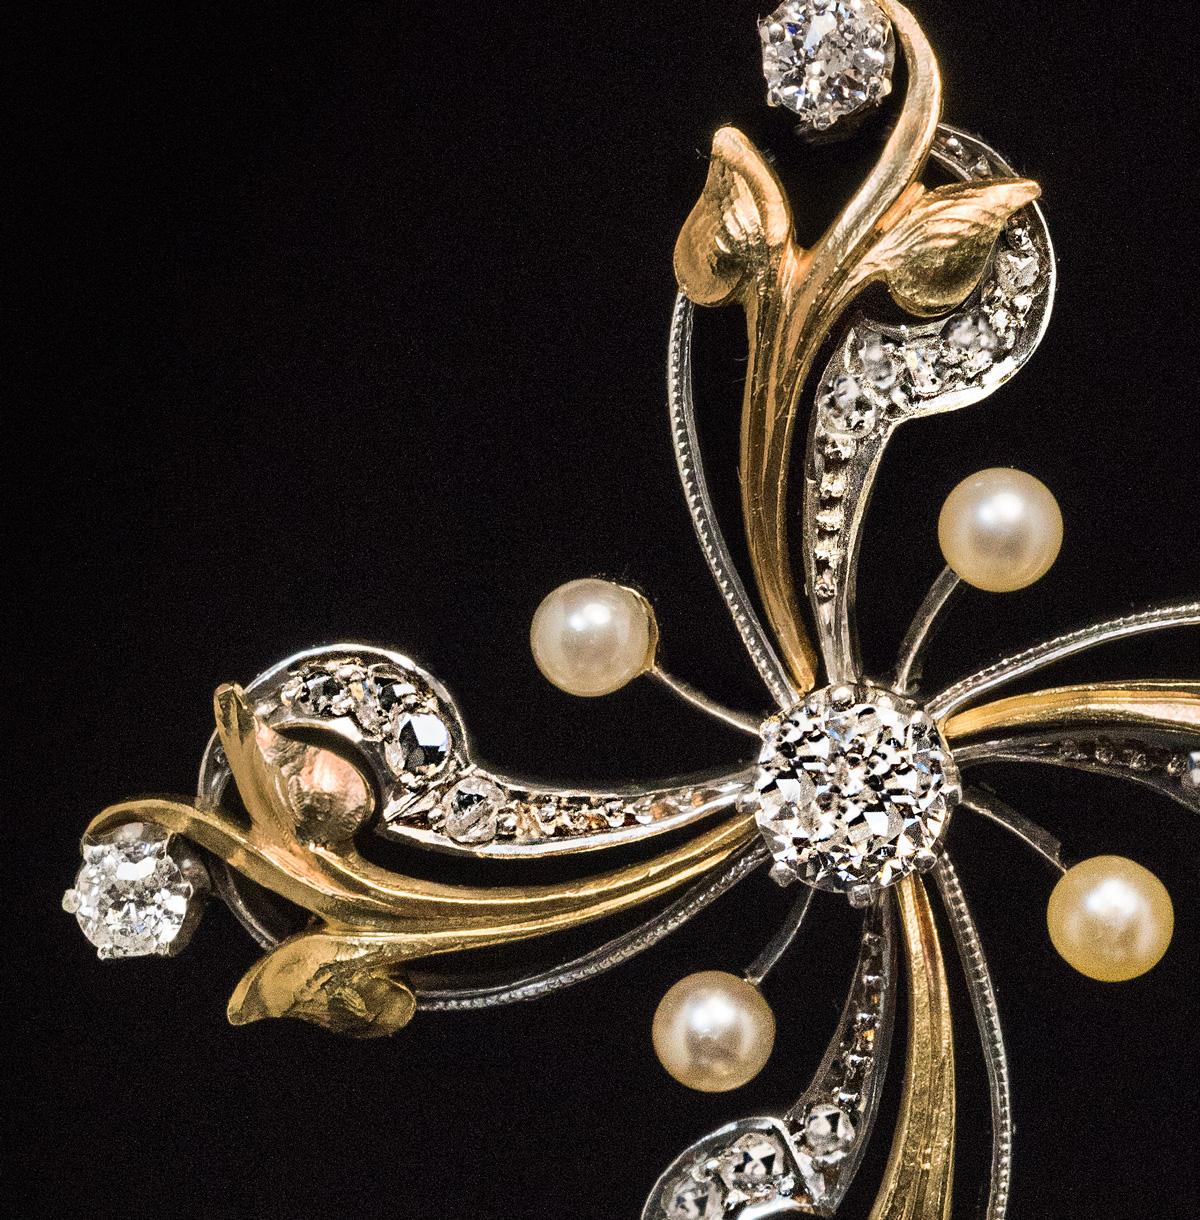 Circa 1900

This ornate Art Nouveau floral-motif cross pendant is certainly one-of-a-kind. The pendant is handcrafted in 14K gold and silver and embellished with six sparkling old European cut diamonds, five seed pearls and numerous small old rose